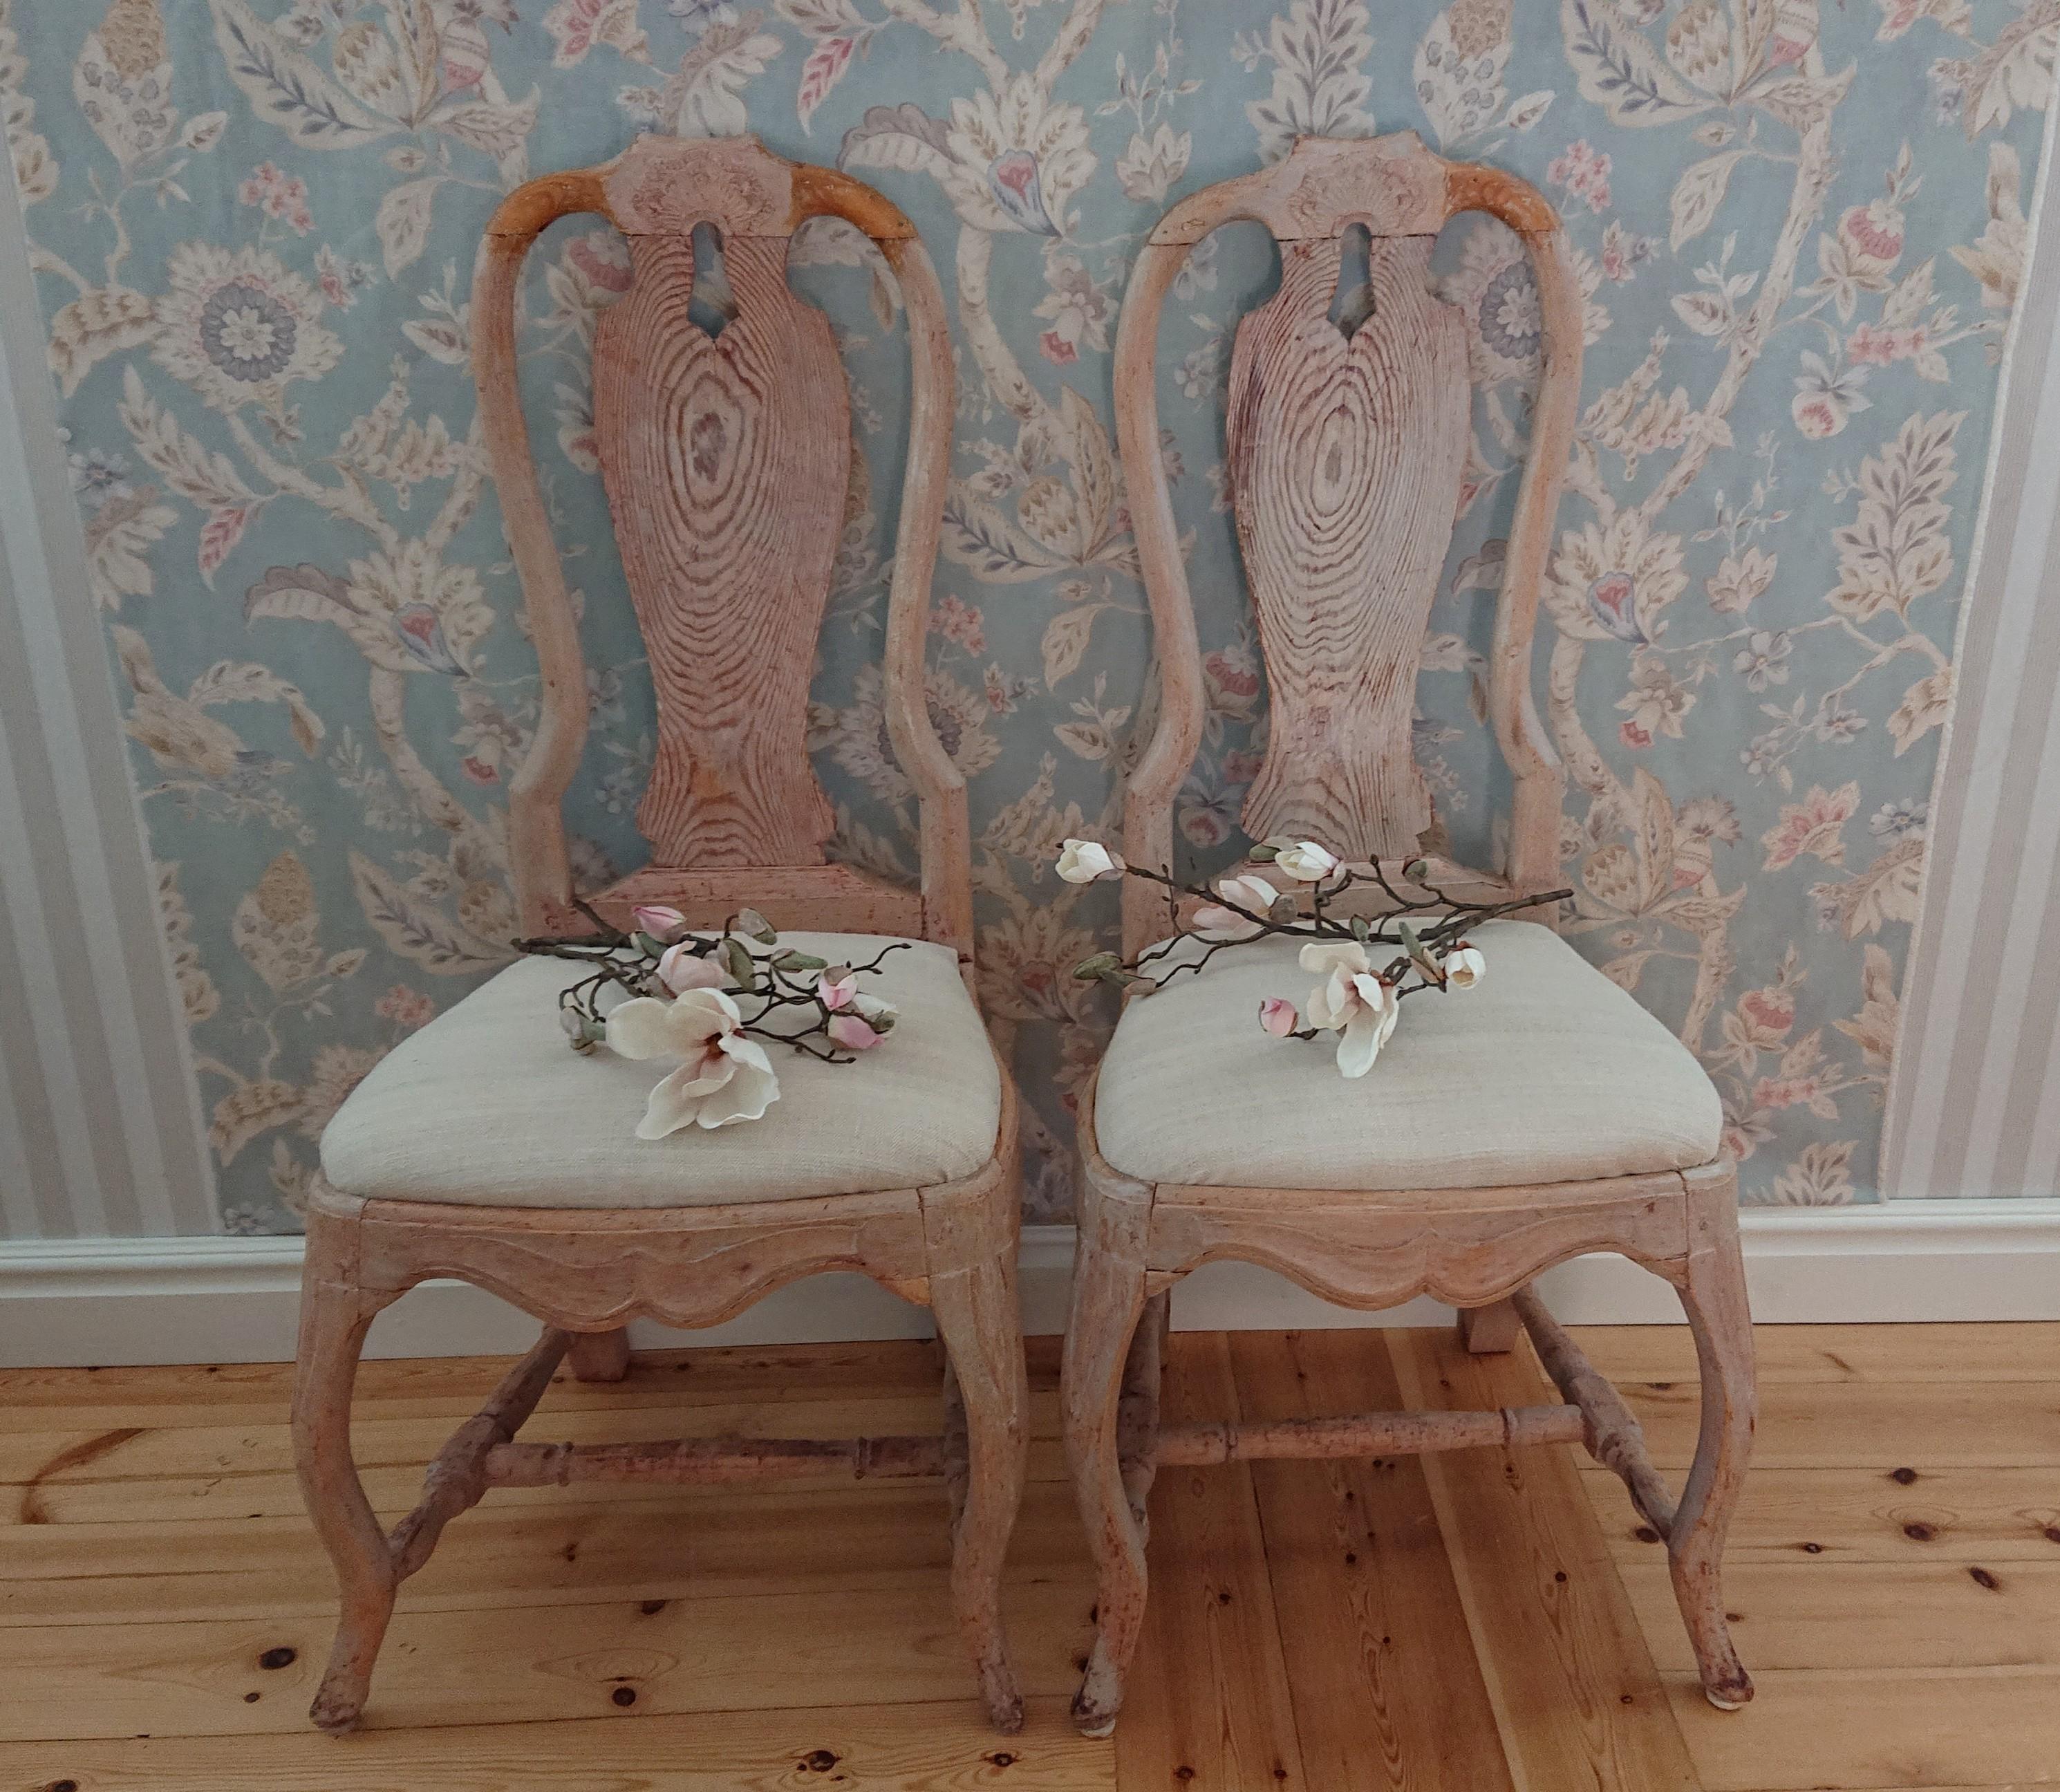 A pair of Swedish rococo chairs 18th century.
Slim in the model with beautifully carved seashell in the back of the chairs.
Scraped by hand to its original color.
The chairs is reupholstery in beatiful light beige linen fabric. Below is the